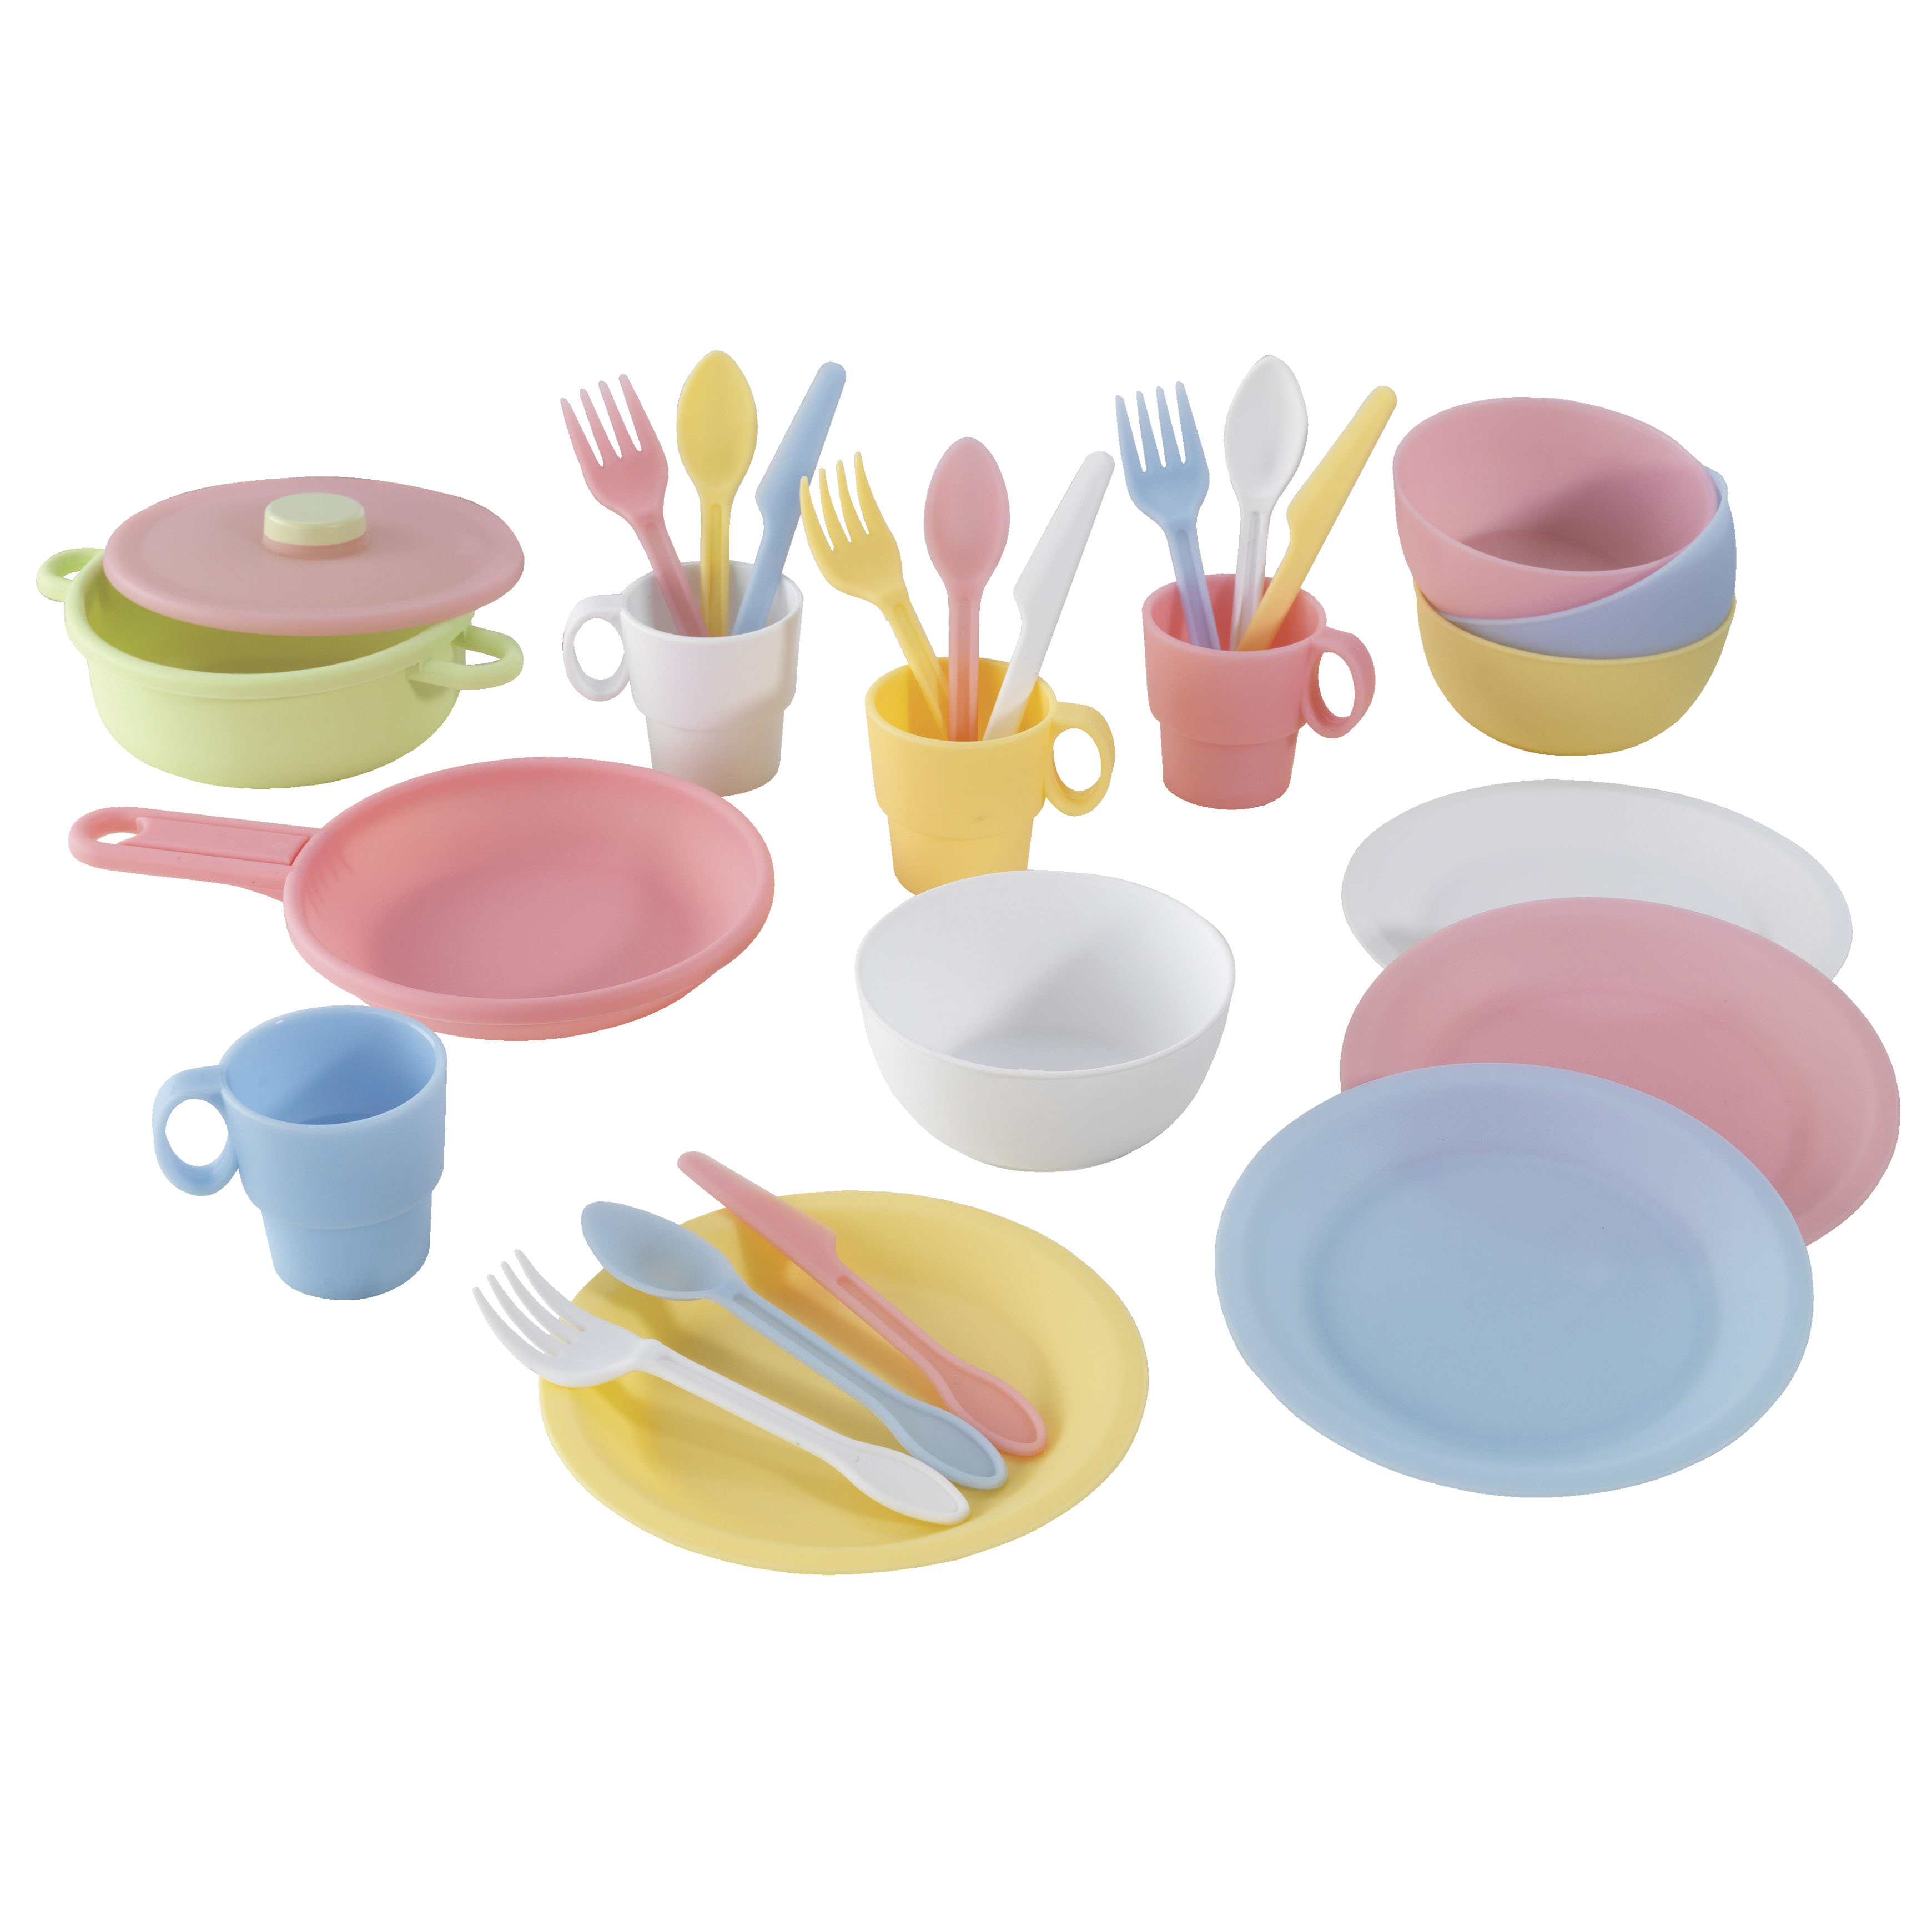 KidKraft 27-Piece Pastel Cookware Set, Plastic Dishes & Utensils for Play Kitchens - image 1 of 5